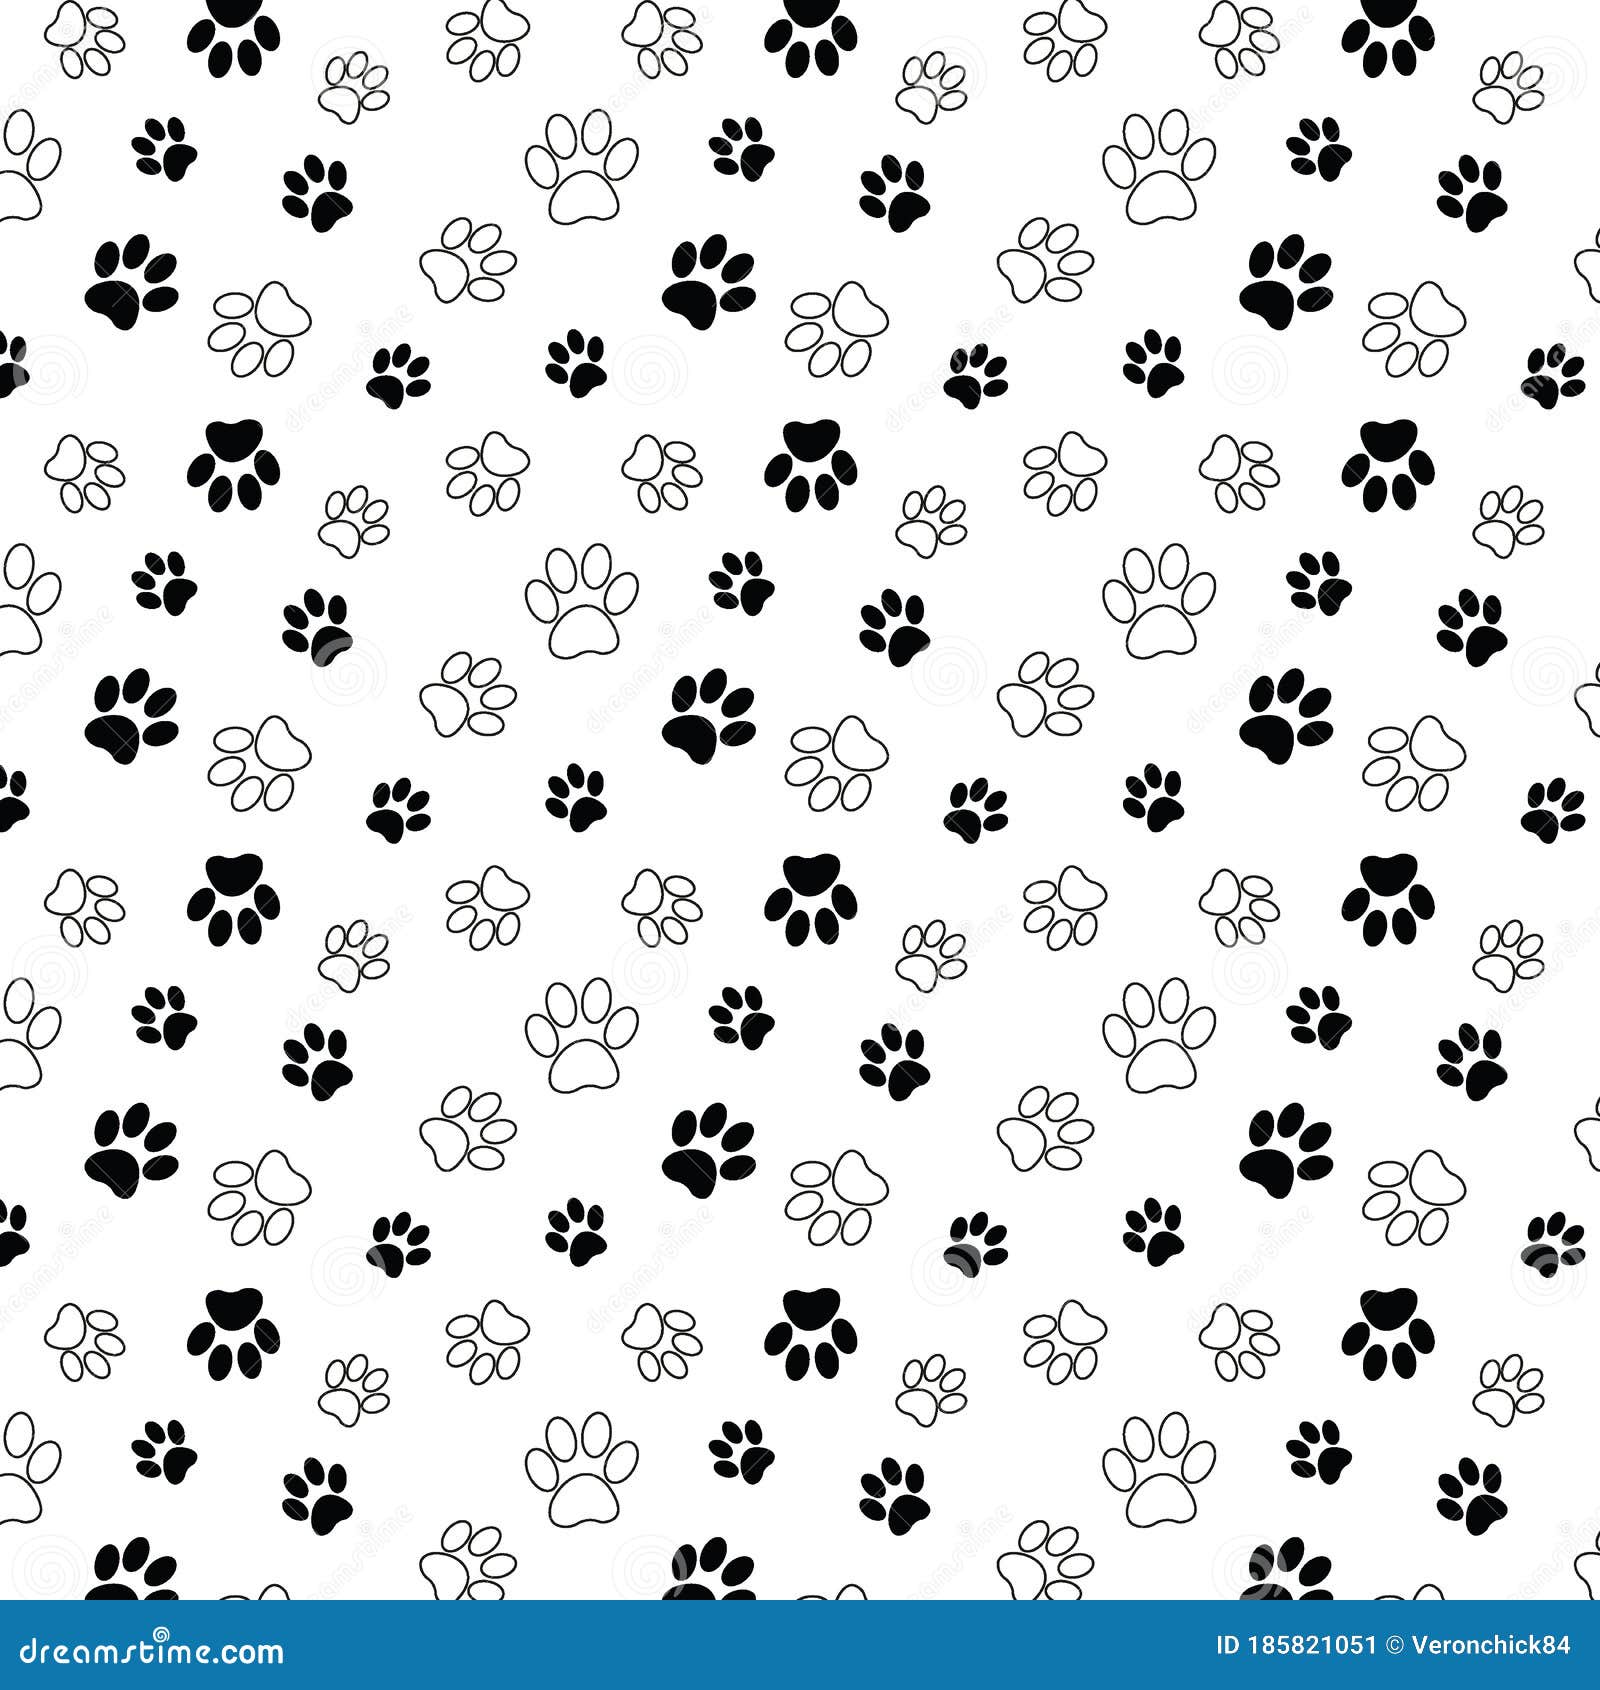 Cat Paw Print Background Images HD Pictures and Wallpaper For Free  Download  Pngtree